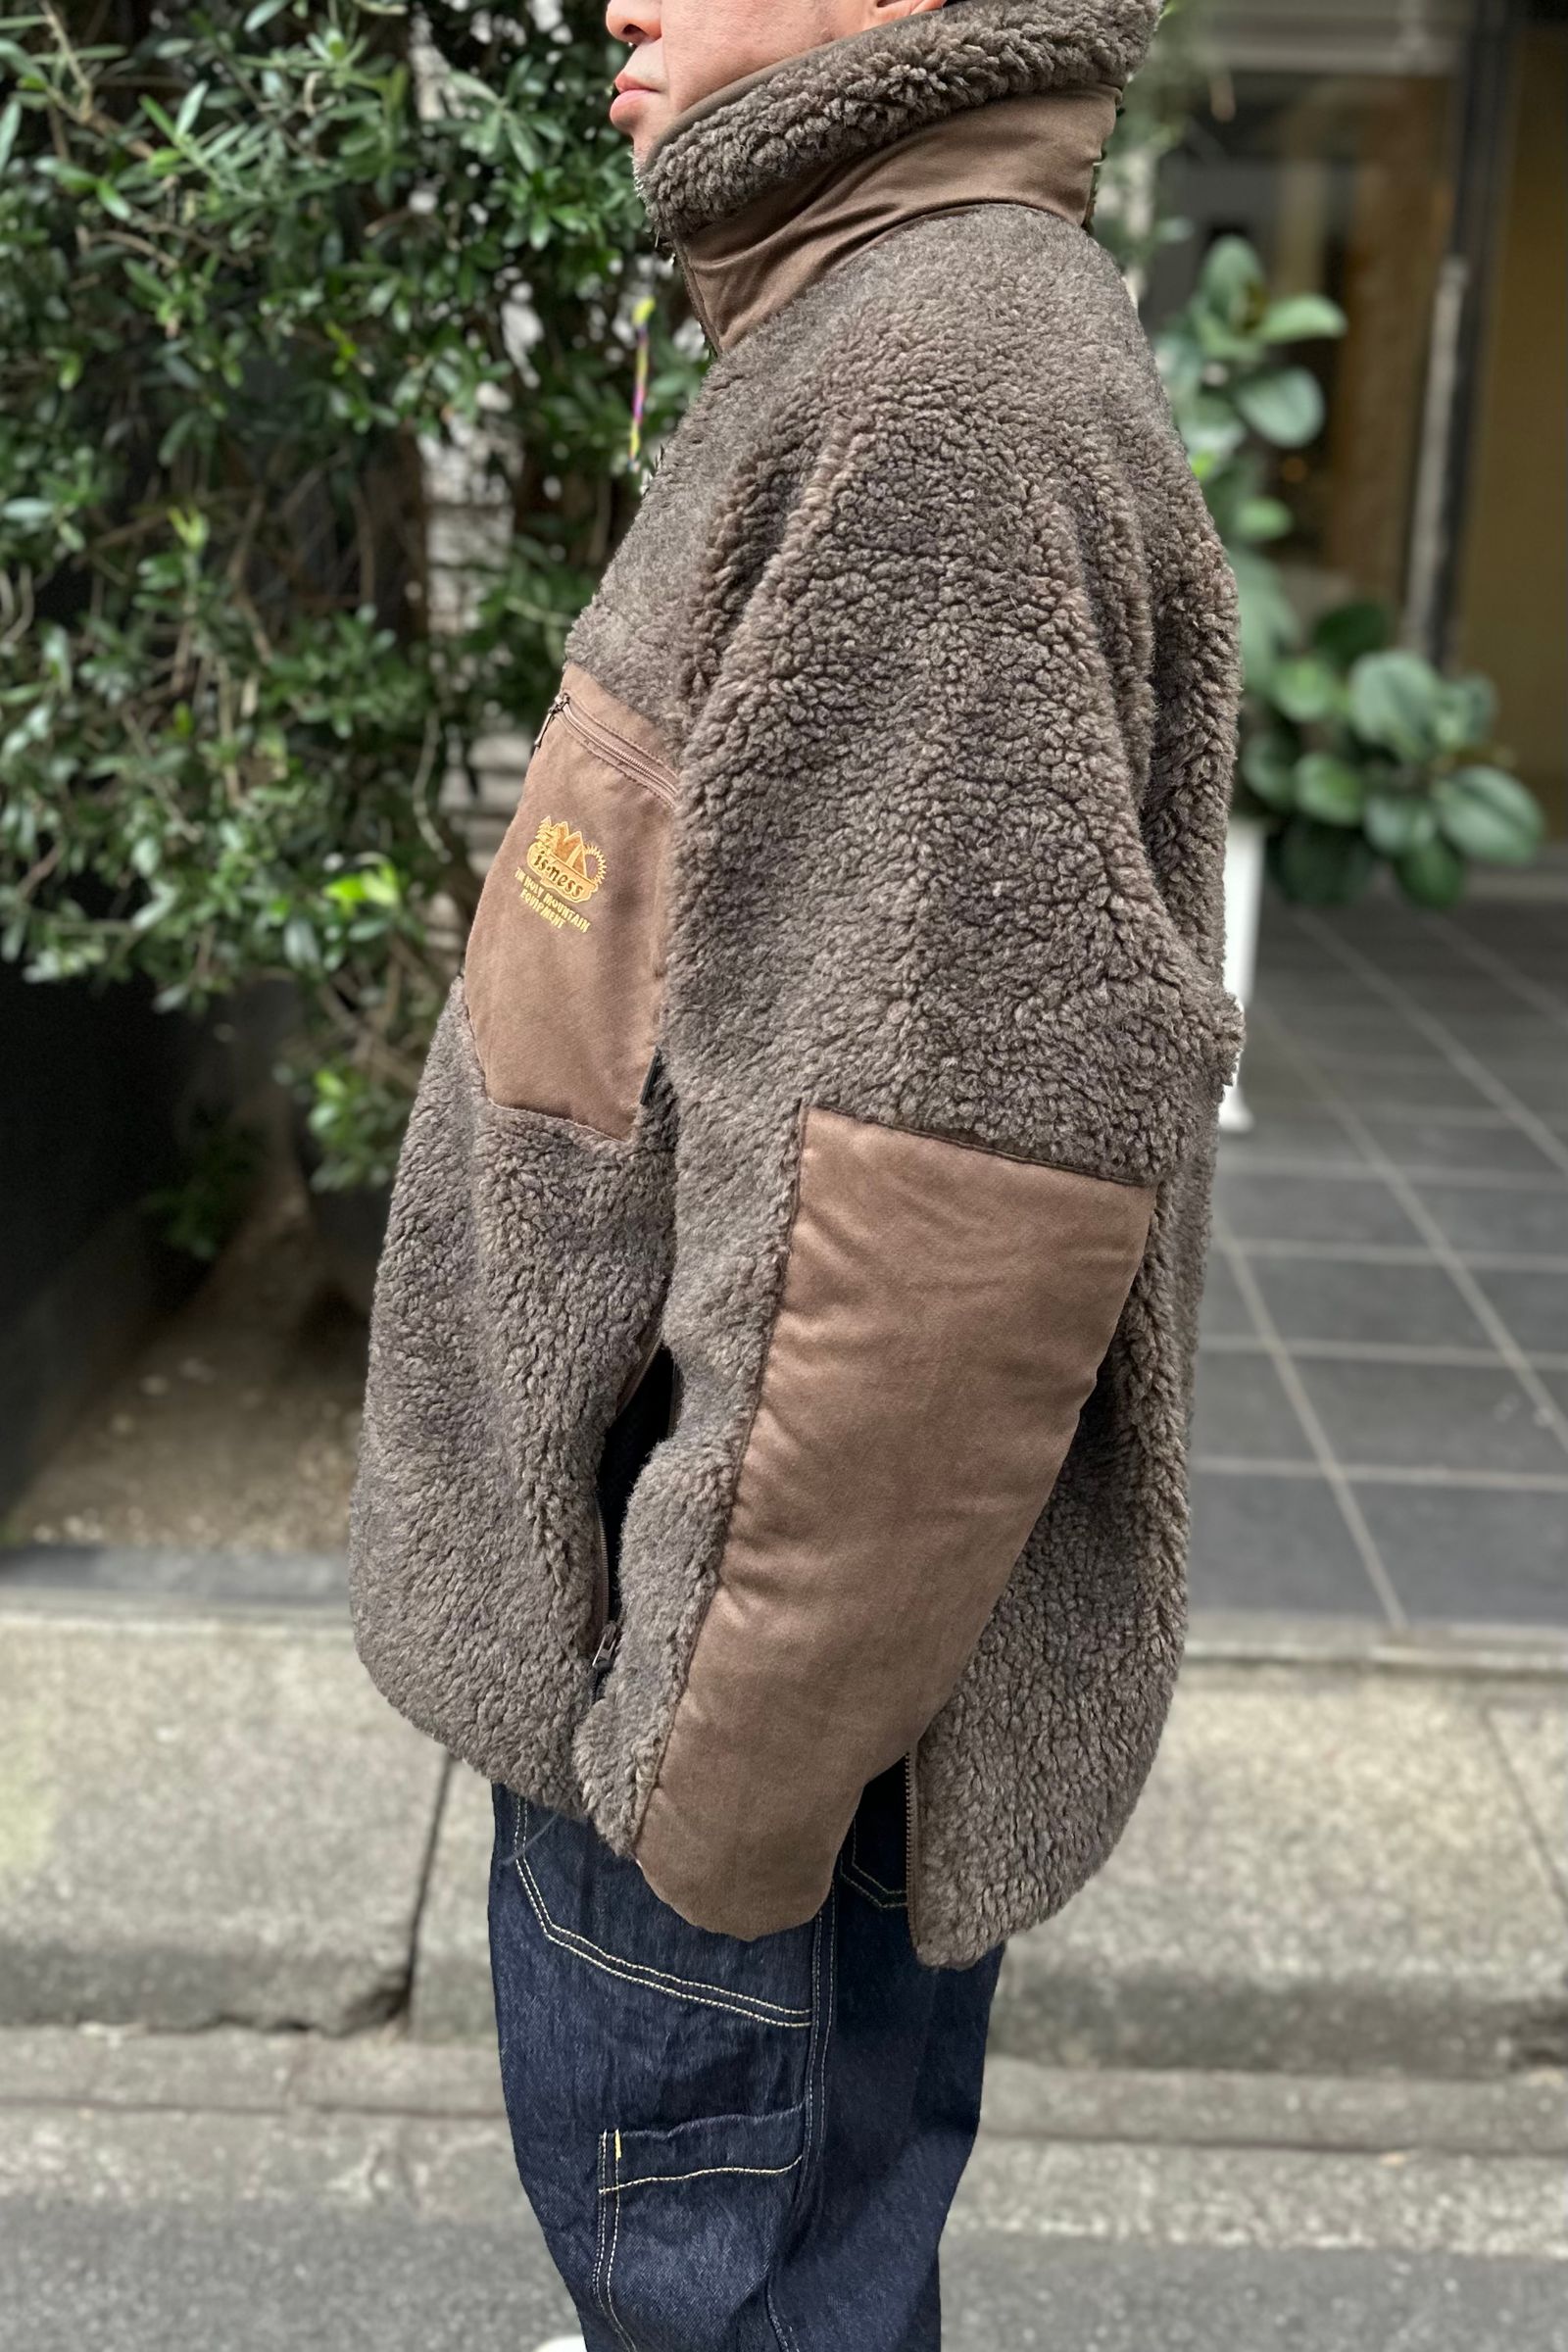 is-ness - THM FLEECE JACKET is-ness×Y(dot) BY NORDISK -MOCHA- 23aw